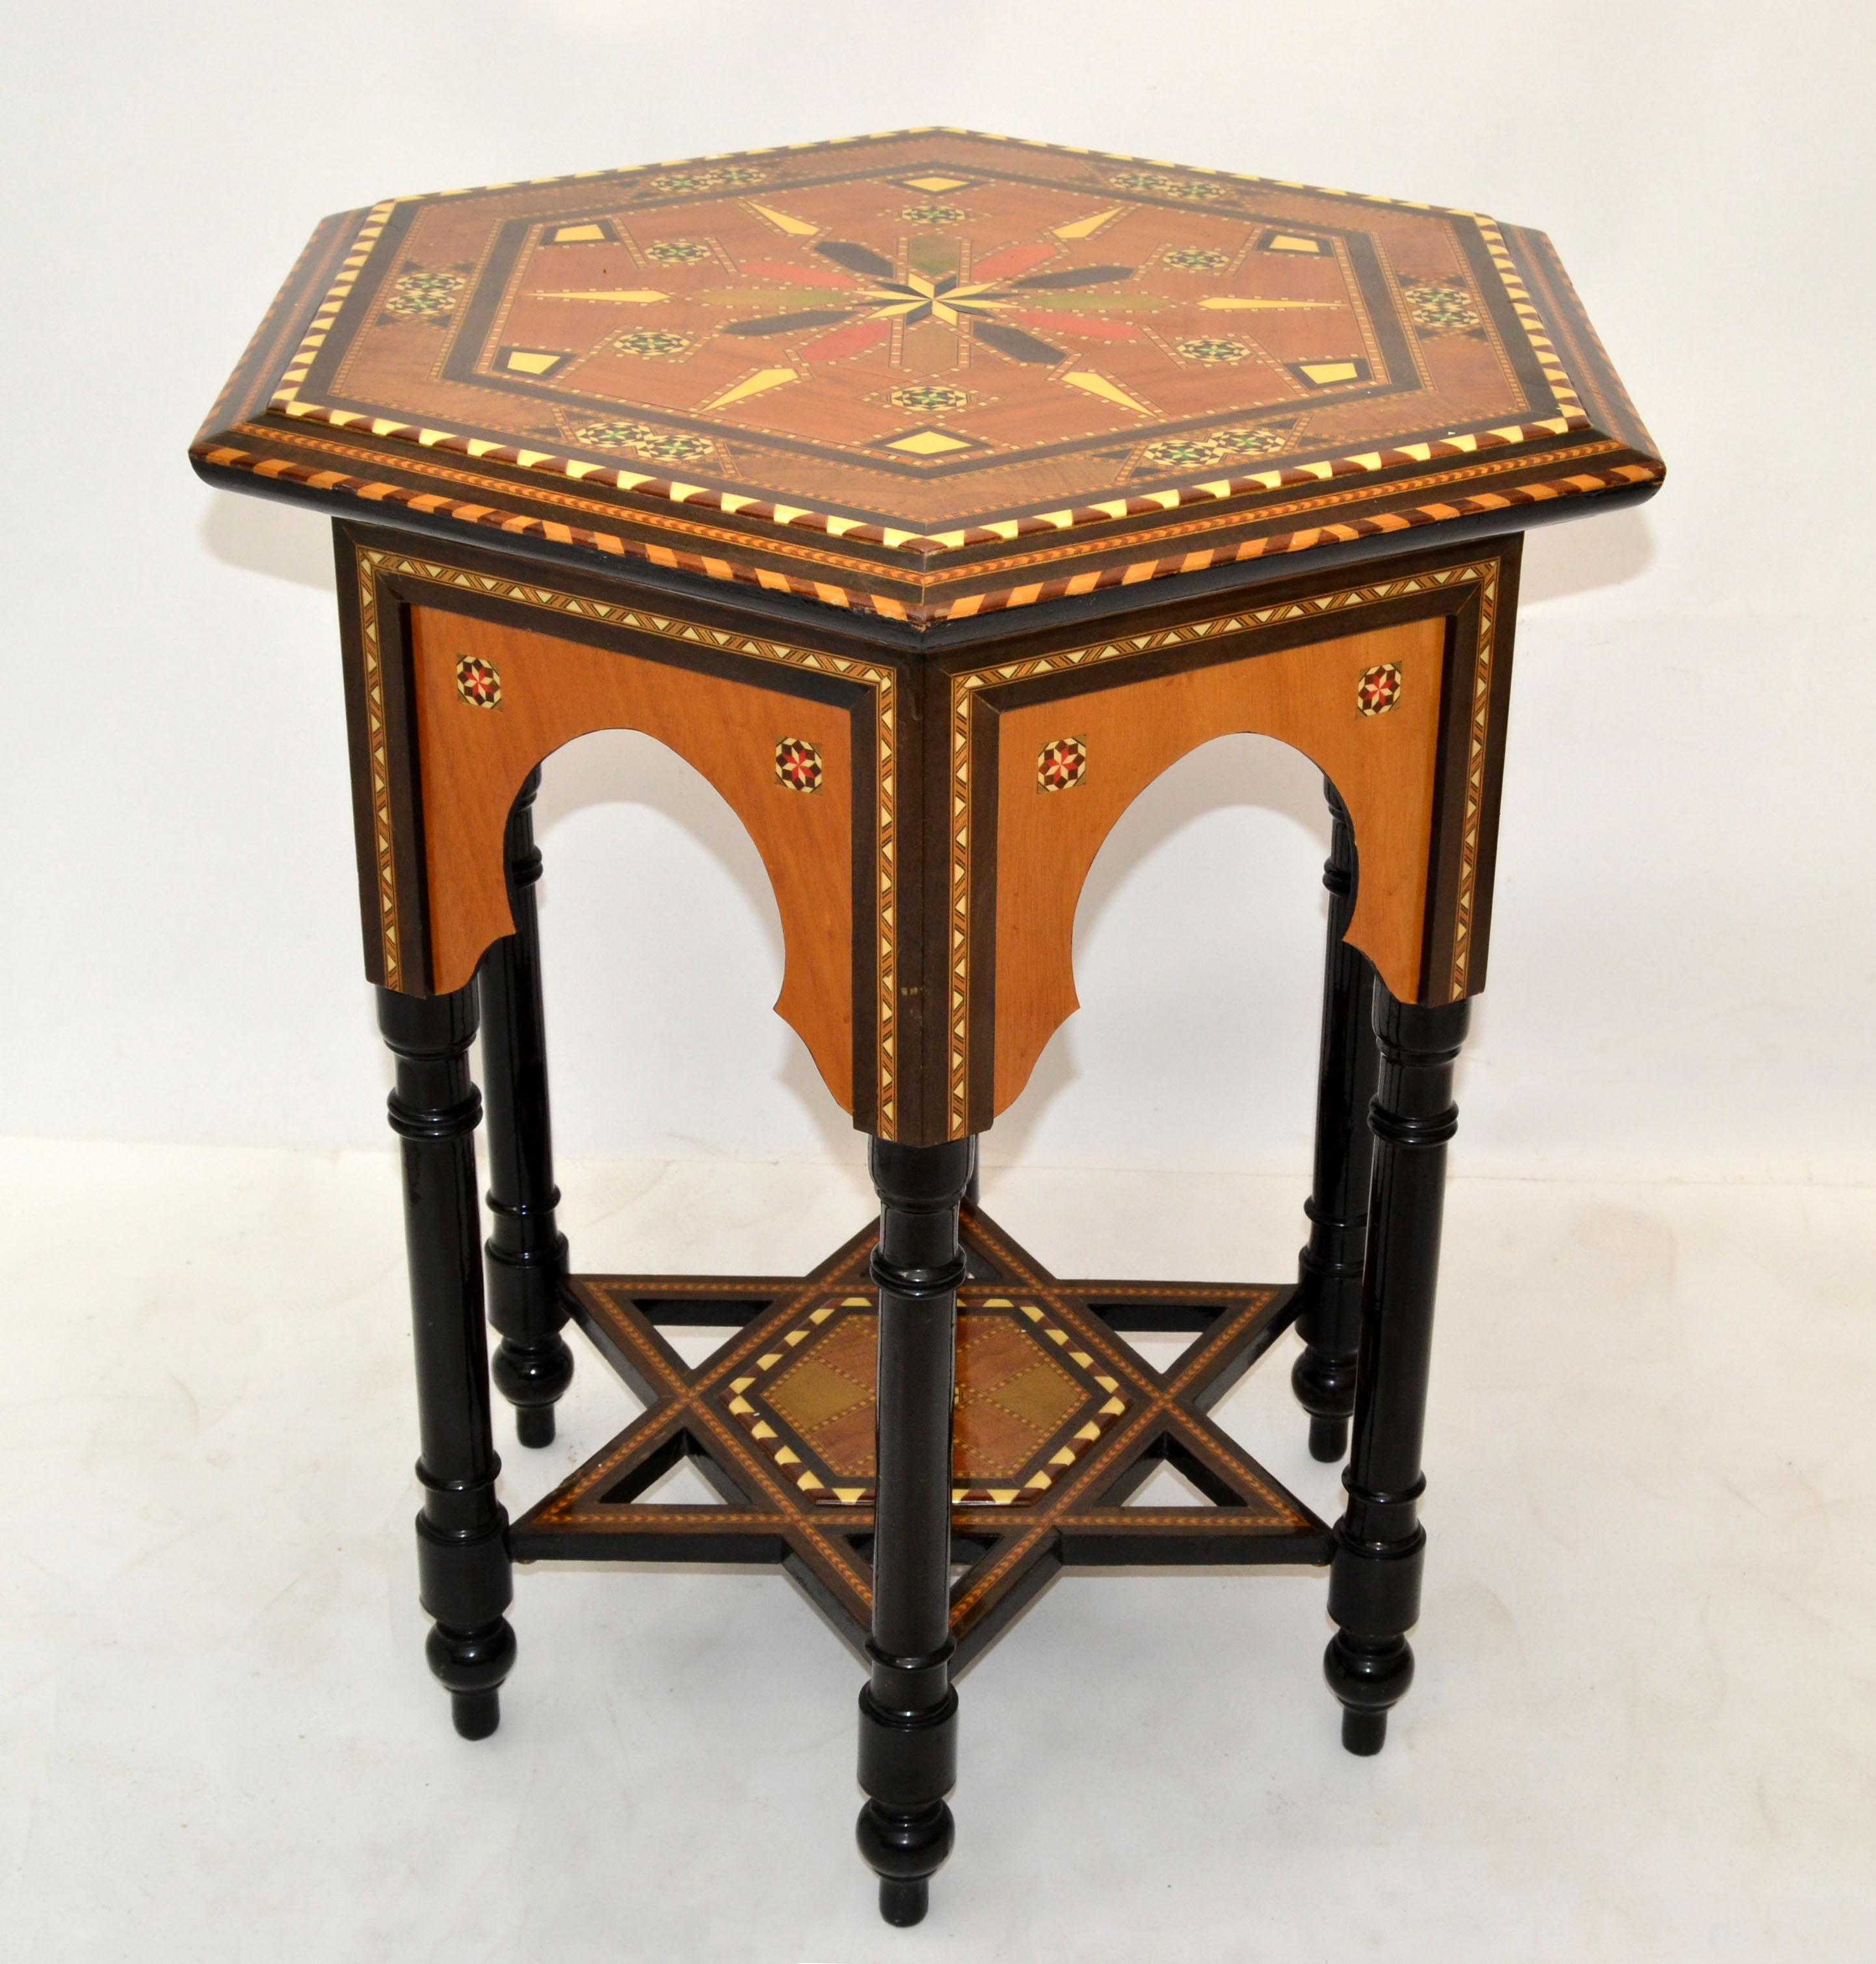 Hexagonal Wood Marquetry Moroccan handmade center table fruitwood midcentury.
Beautiful Pattern of Marquetry in beige, green, orange and brown.
All original turned wooden legs in black finish and a stunning star in the base center.